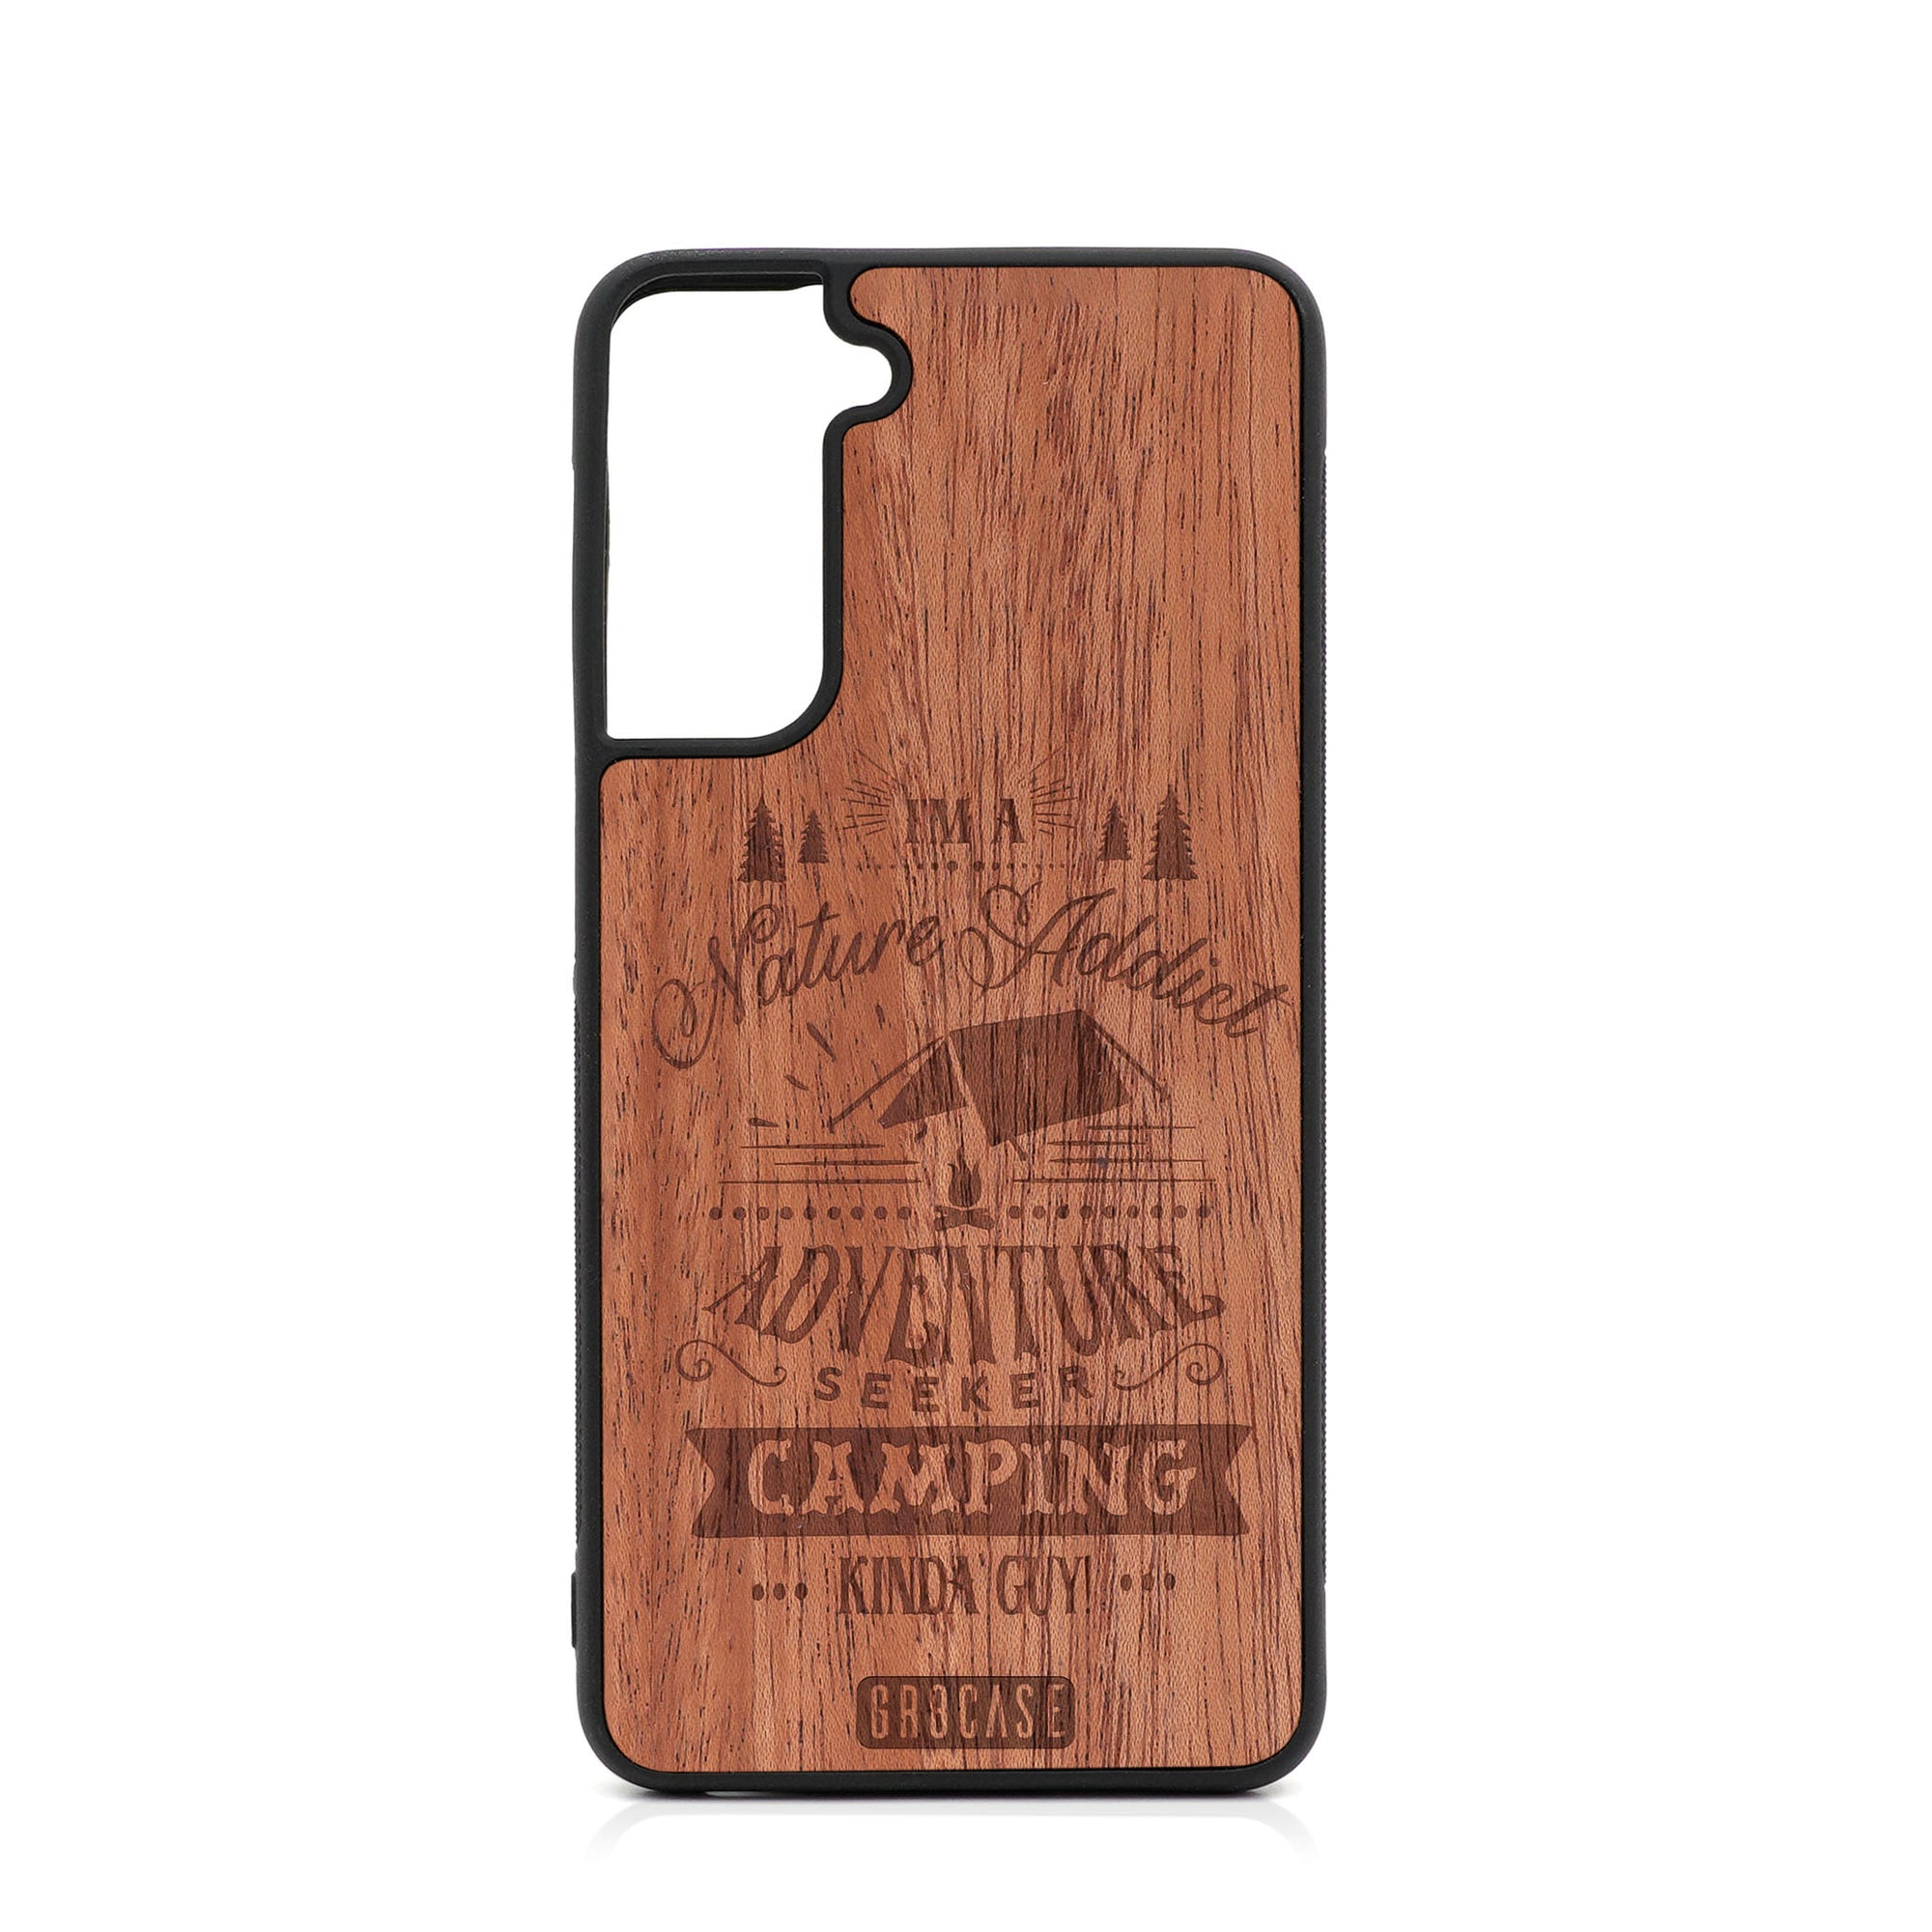 I'm A Nature Addict Adventure Seeker Camping Kinda Guy Design Wood Case For Samsung Galaxy S21 Plus 5G